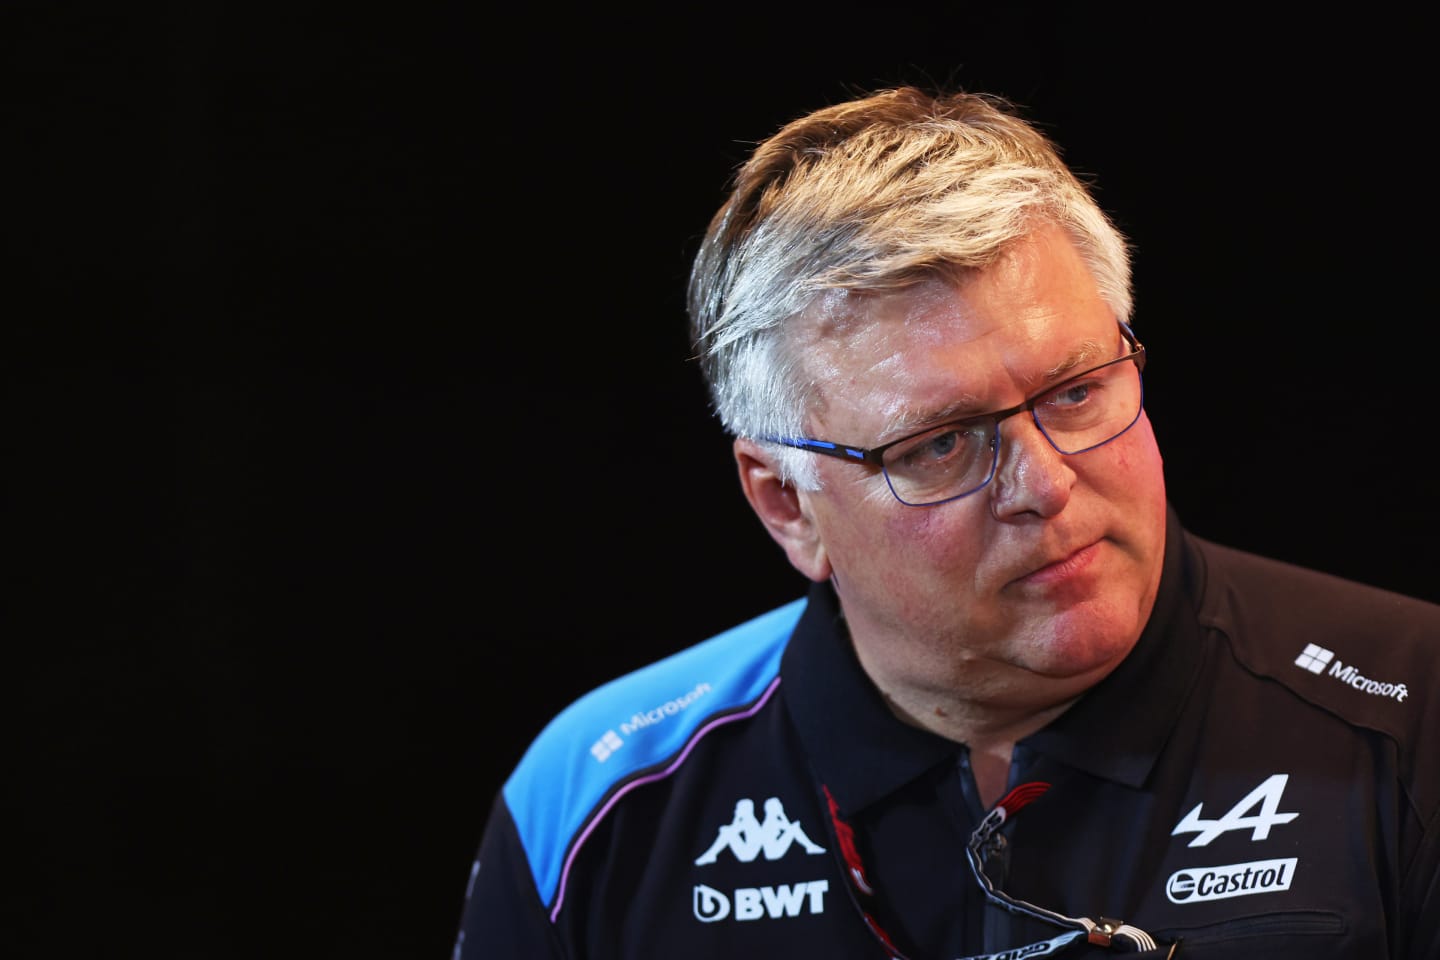 MONTREAL, QUEBEC - JUNE 16: Otmar Szafnauer, Team Principal of Alpine F1 attends the Team Principals Press Conference during practice ahead of the F1 Grand Prix of Canada at Circuit Gilles Villeneuve on June 16, 2023 in Montreal, Quebec. (Photo by Dan Istitene/Getty Images)